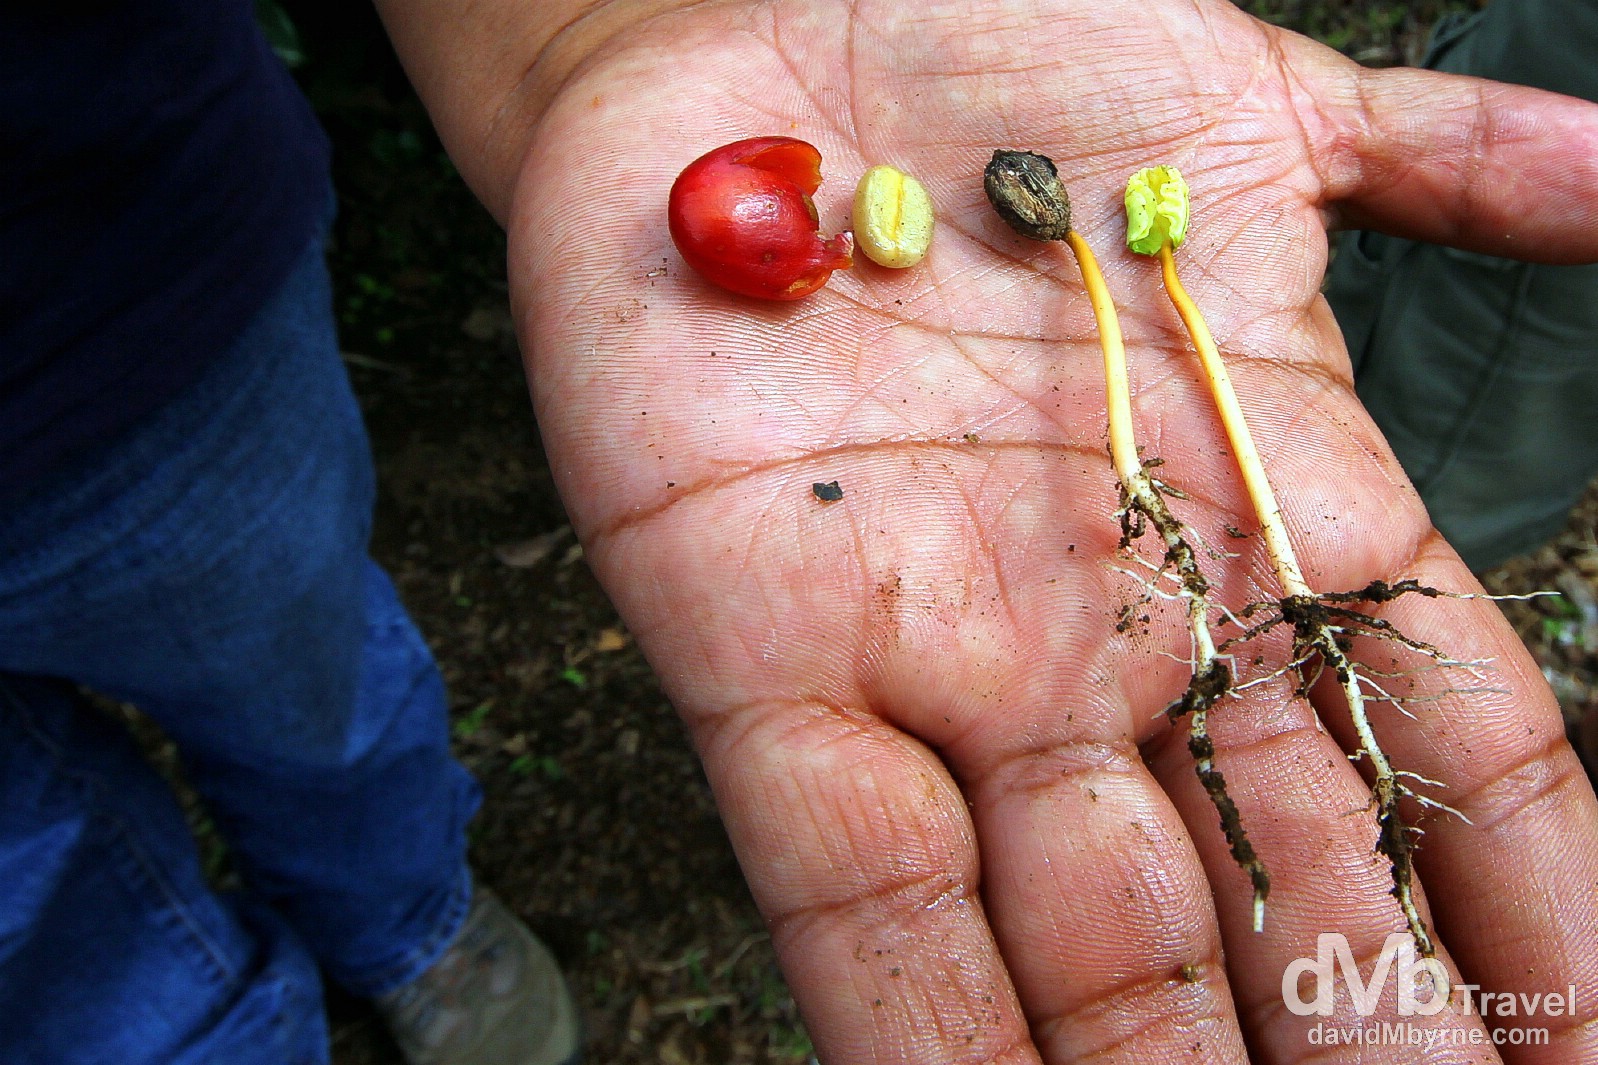 The various stages of coffee bud development is explained at Cafe Ruiz coffee plantation, Boquete, Panama. June 29th 2013. 